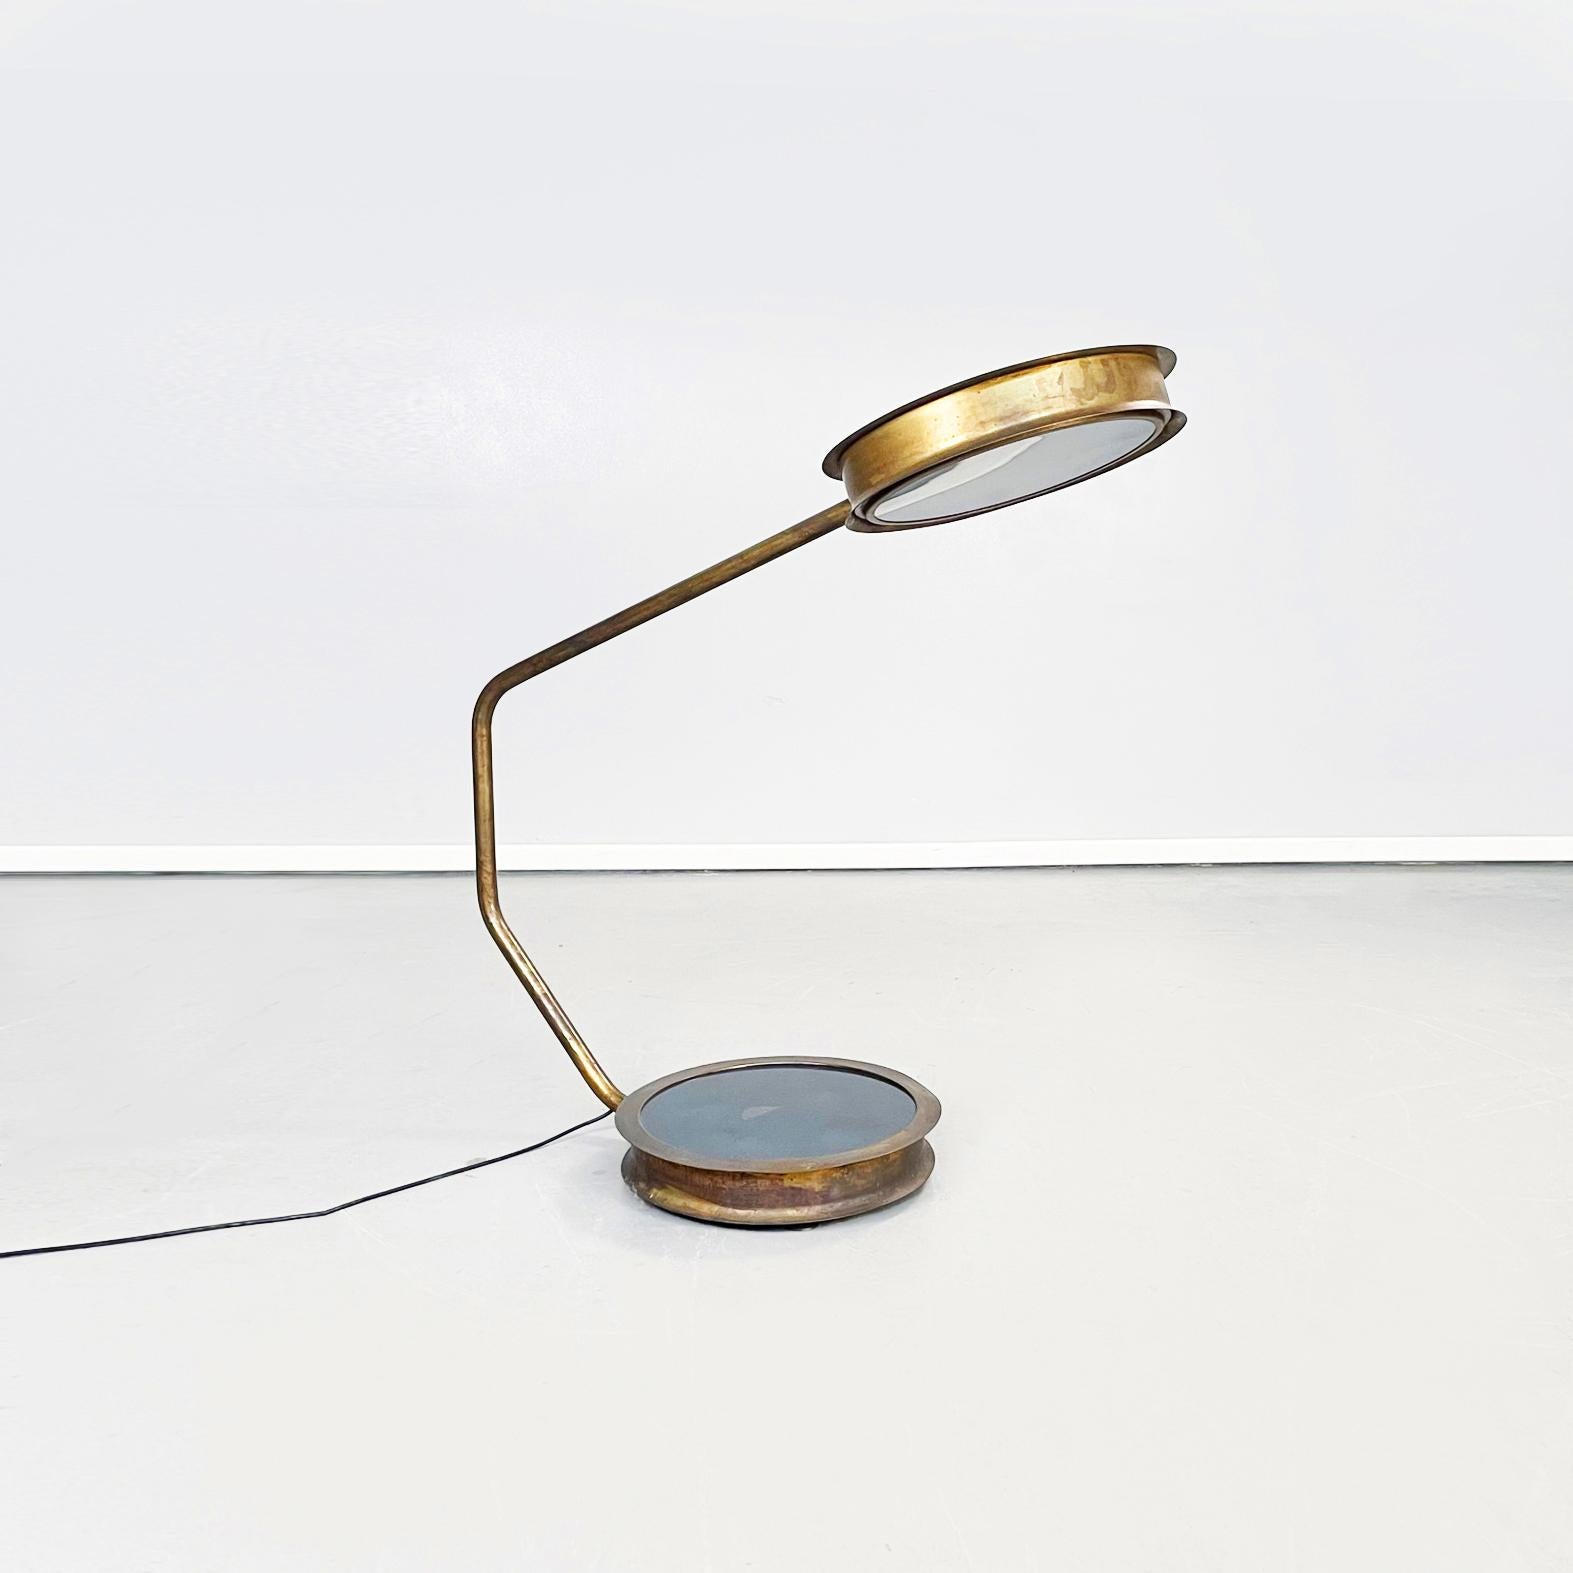 Italian post-modern Brass floor lamp mod. After Glow T by Vincenzo De Cotiis for Ceccotti Collezioni, 2000s
Floor lamp mod. After Glow T in burnished brass and tempered glass. The structure is in tubular brass. In the upper part and in the ground